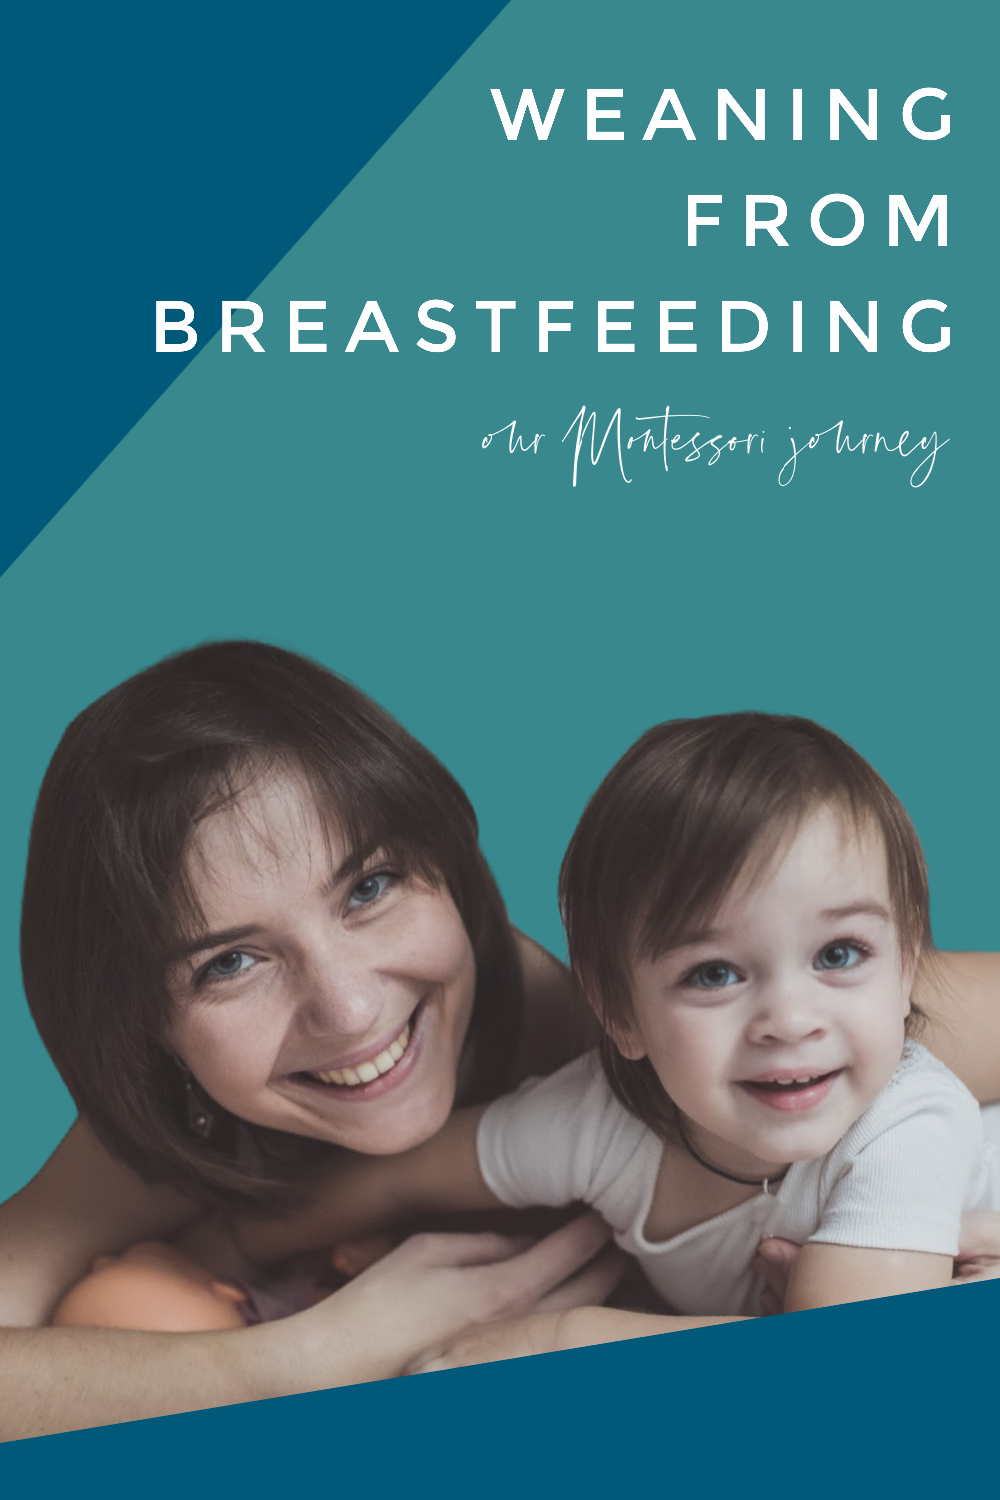 In this Montessori parenting podcast, we examine the Montessori approach to weaning from breastfeeding including our own weaning journeys.